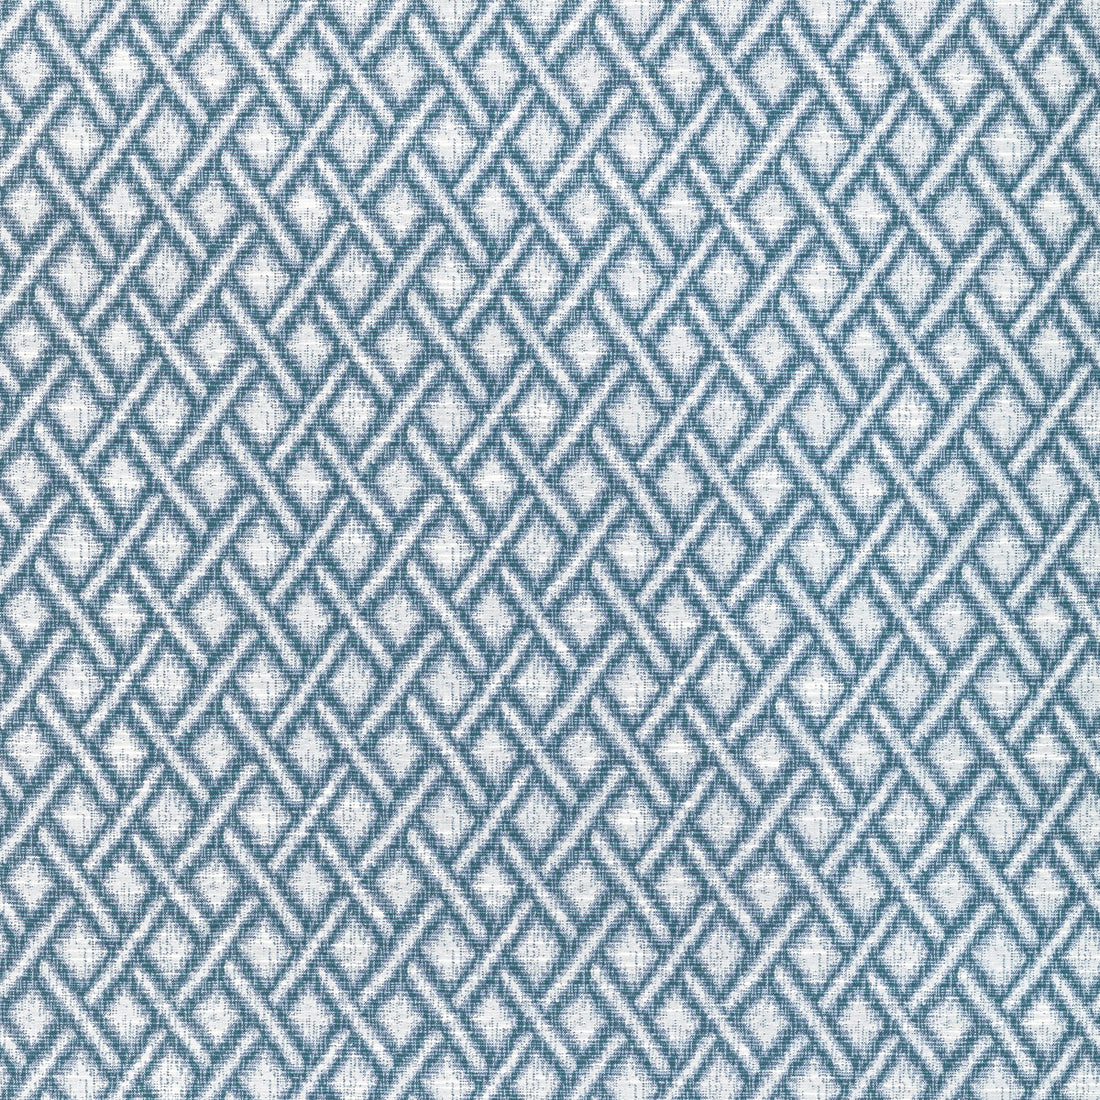 Cass fabric in chambray color - pattern 36595.5.0 - by Kravet Basics